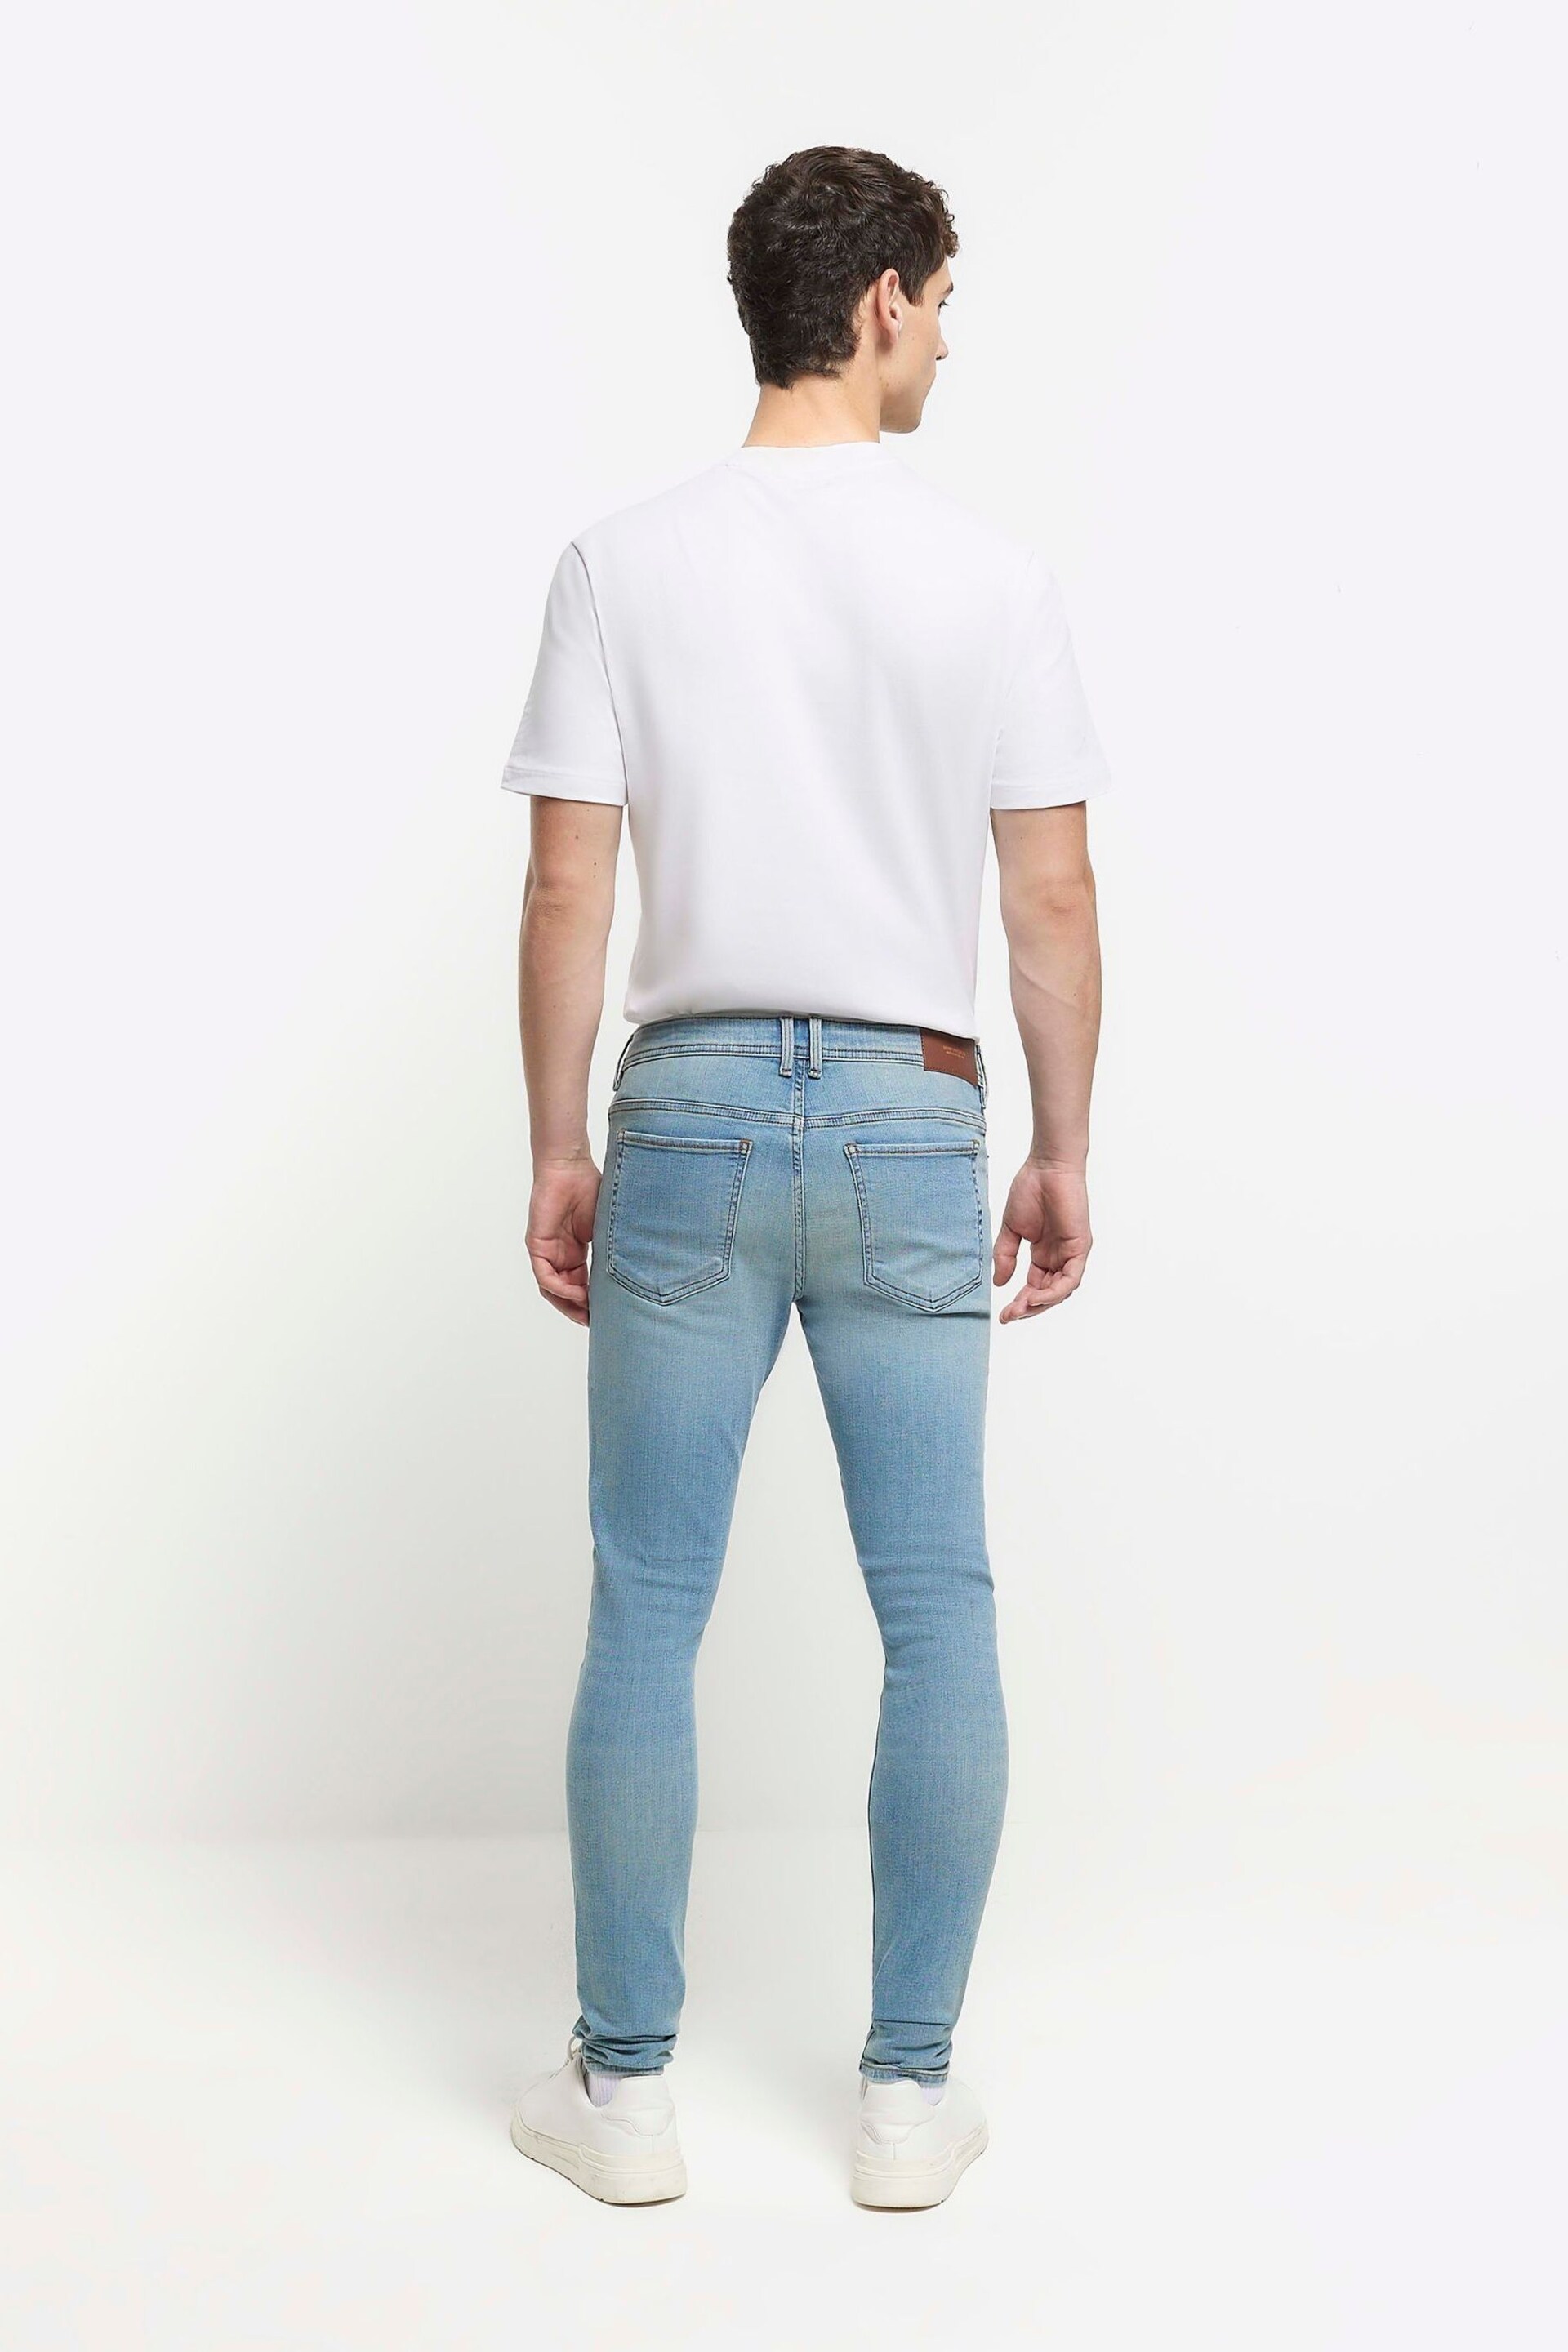 River Island Blue Spray On Skinny Fit Jeans - Image 2 of 4